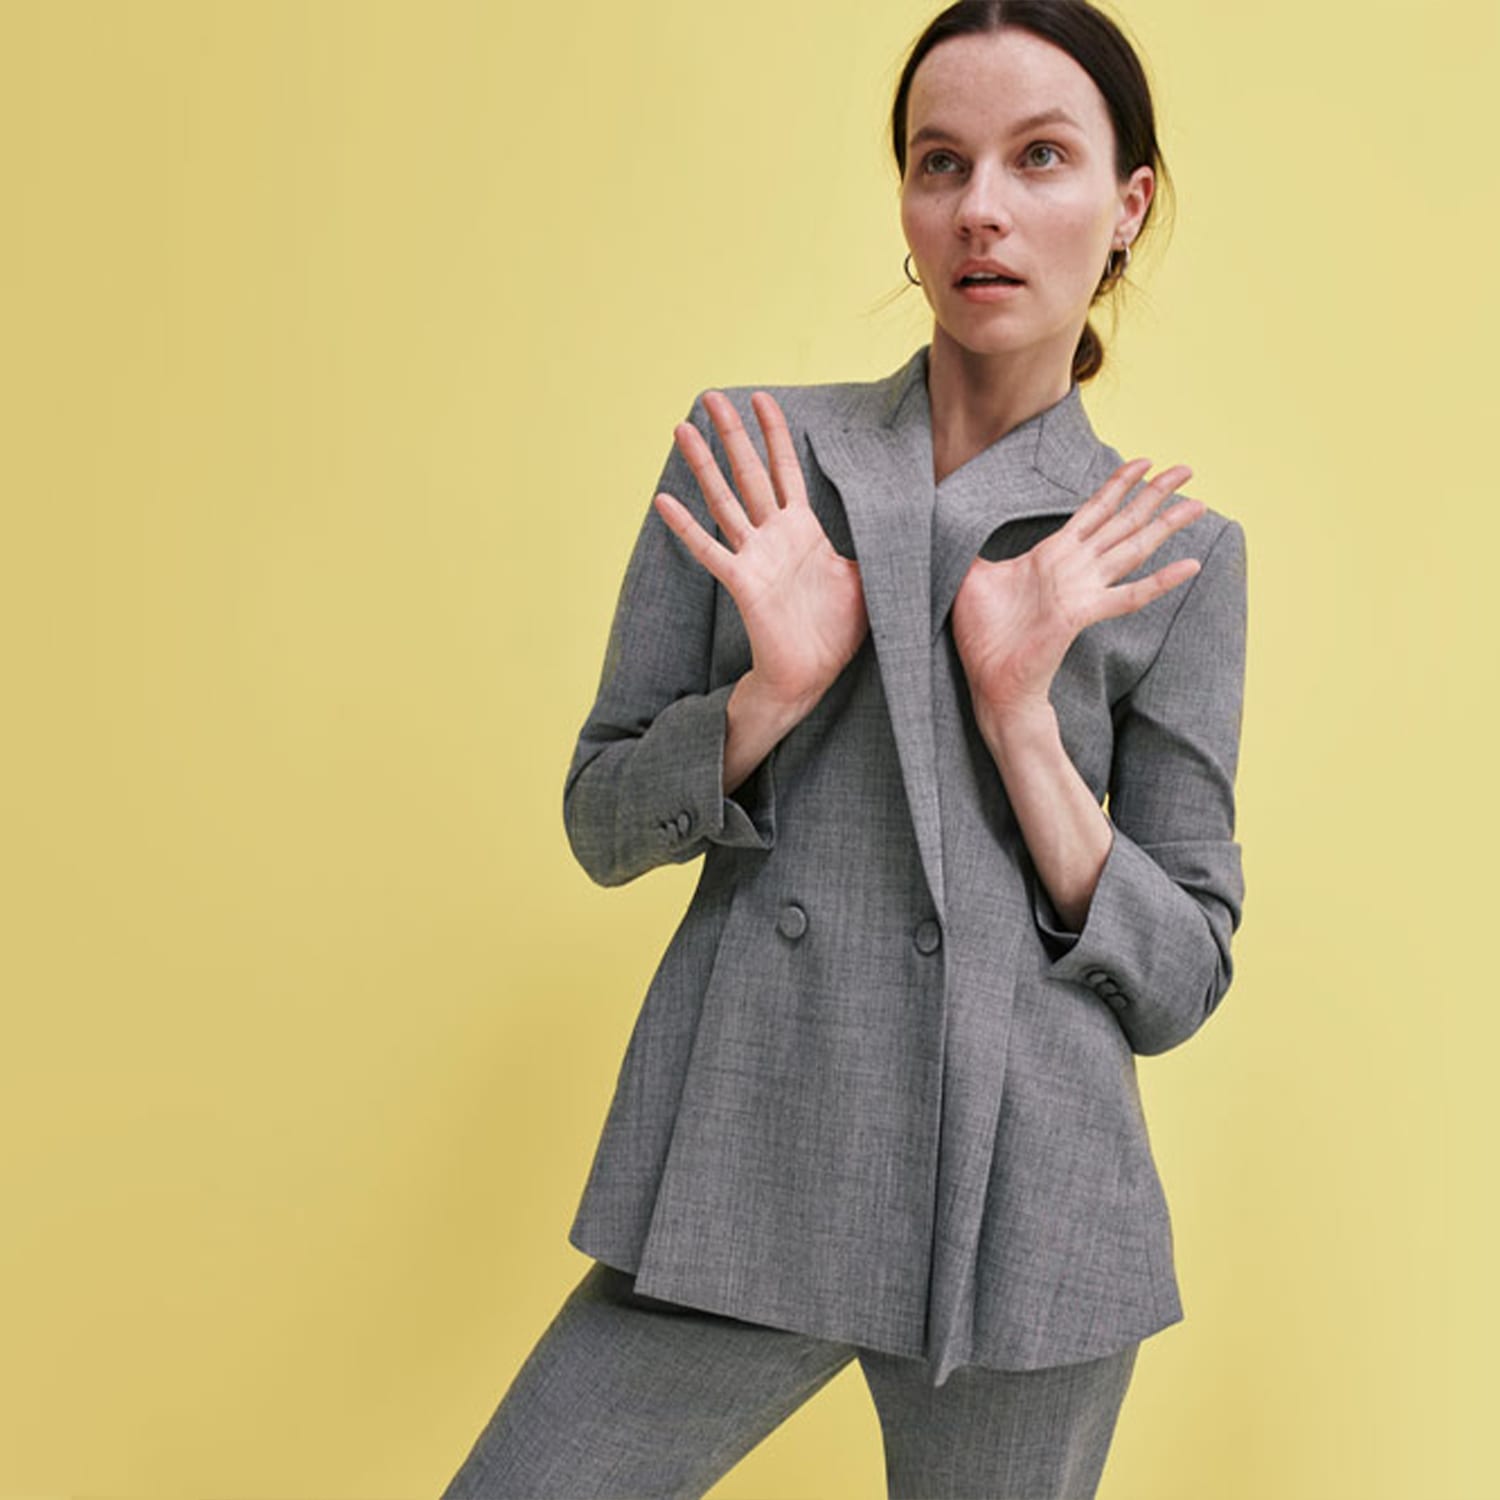 woman lifting collar of Gaia suit blazer in gray sharkskin fabric, standing in front of yellow background